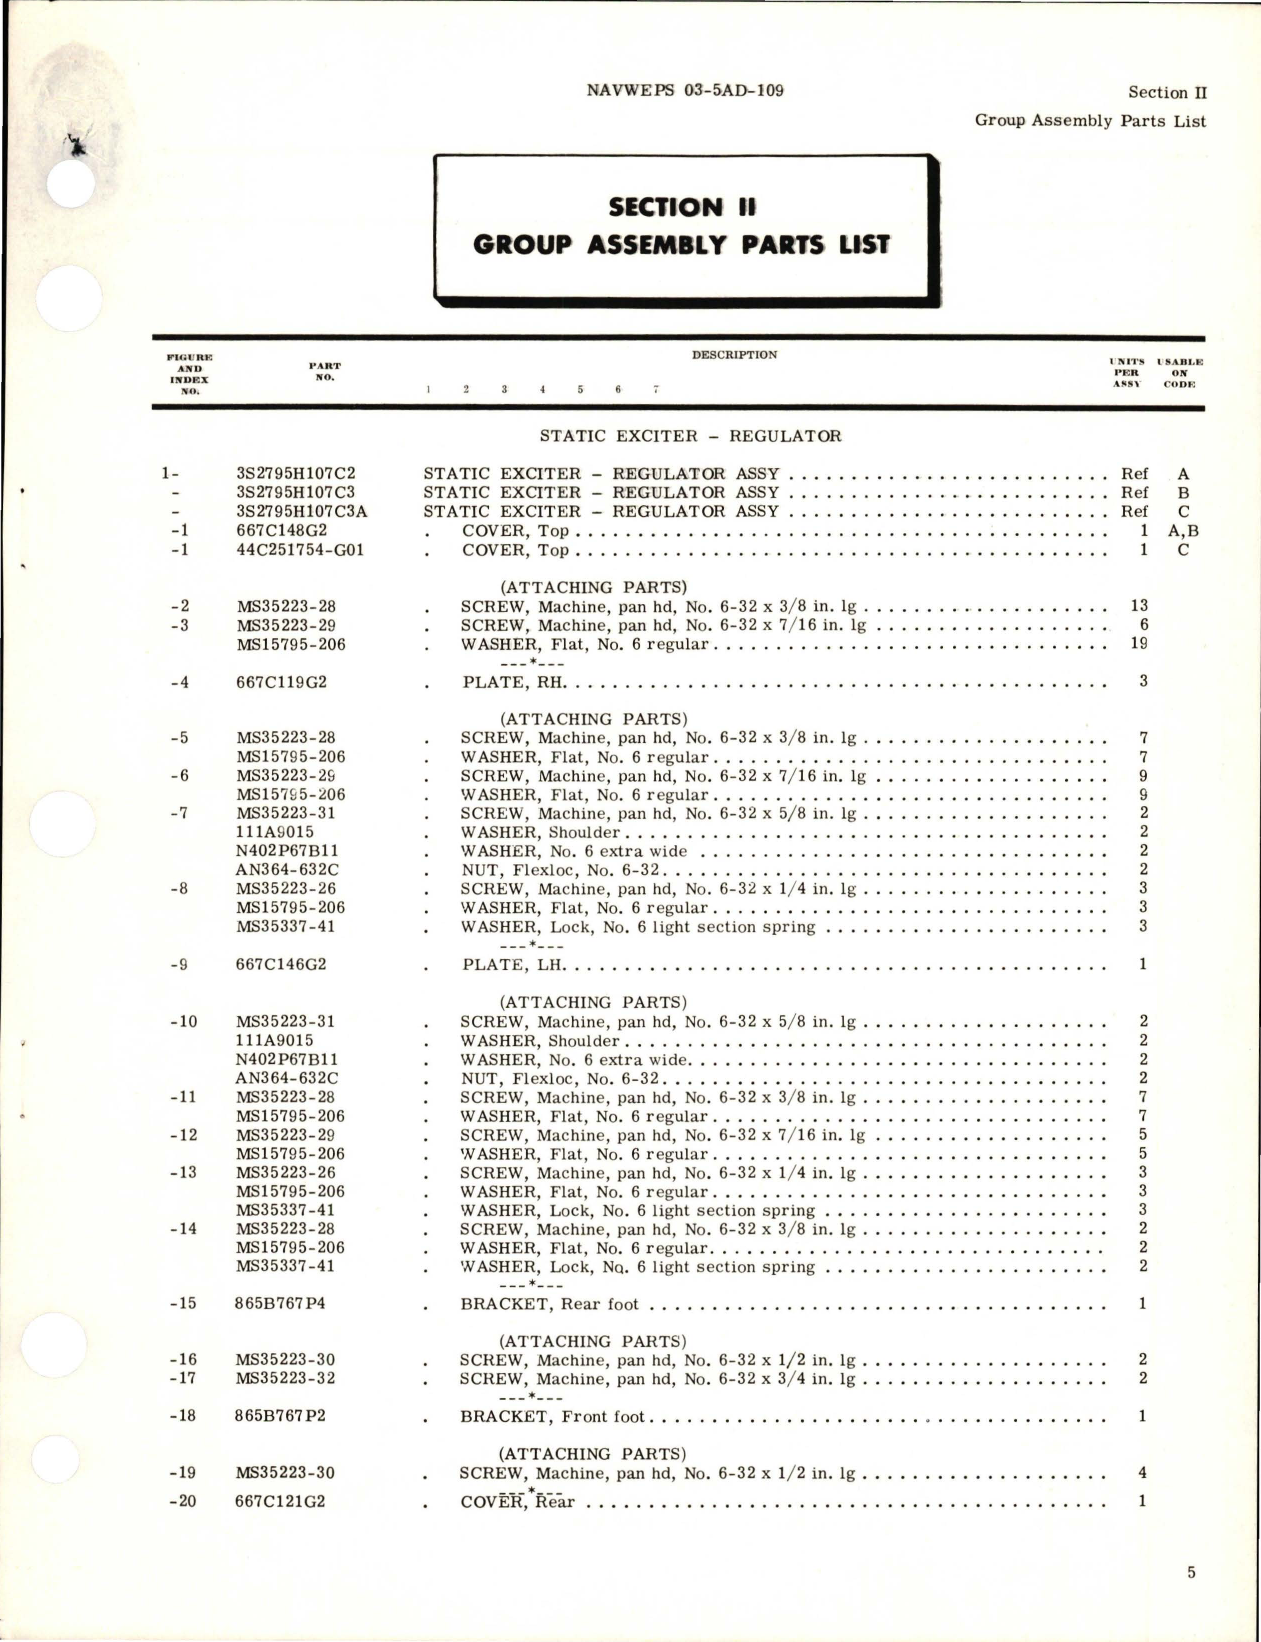 Sample page 7 from AirCorps Library document: Illustrated Parts Breakdown for Static Exciter Regulator - Models 3S2795H107C2, 3S2795H107C3, and 3S2795H107C3A 